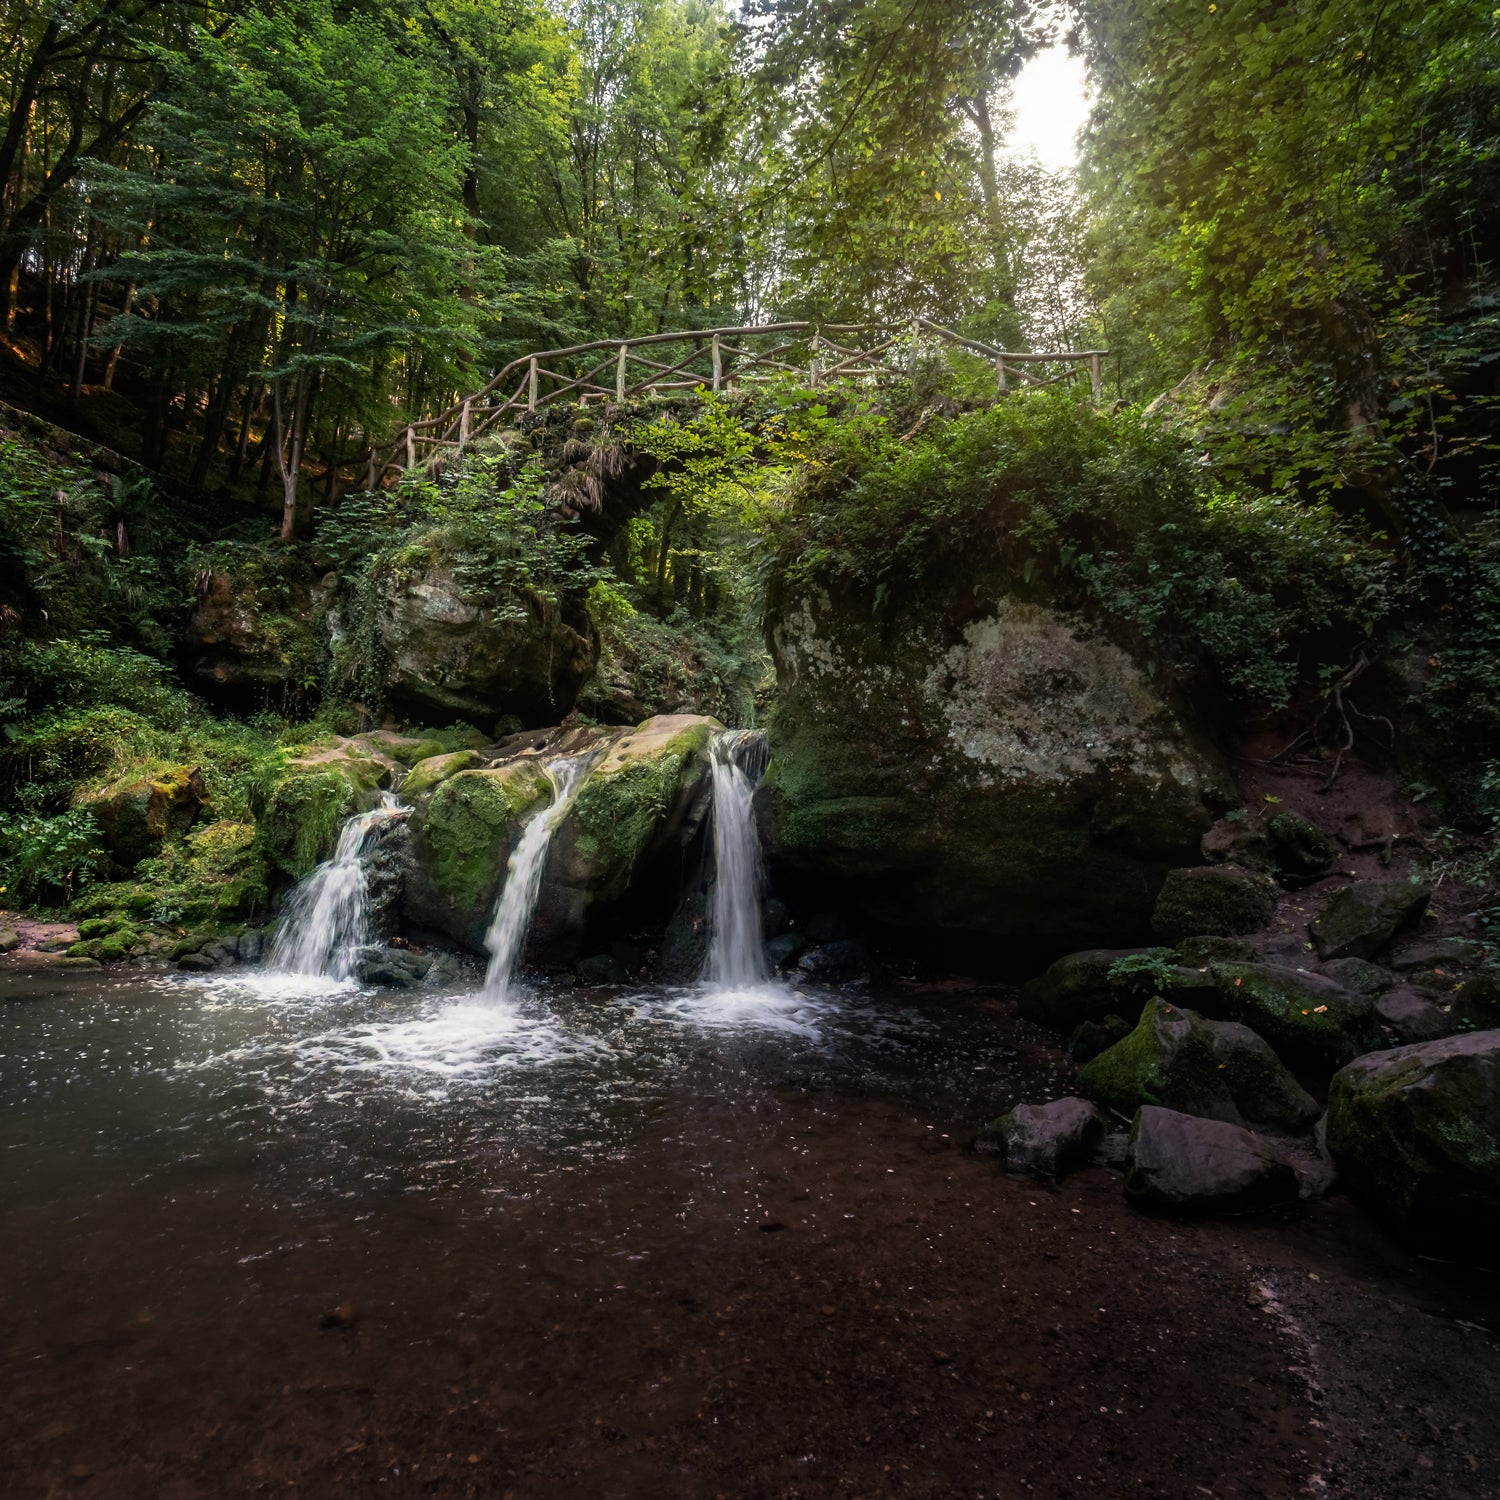 A photo of a woodland waterfall pouring into a bubbling creek. This scene is the inspiration for "Woodland Waterfall", a unisex  scented candle from Tuscany Candle which seamlessly blends the invigorating essence of Fresh Ocean Air with the earthy undertones of Weathered Driftwood and a hint of Vetiver